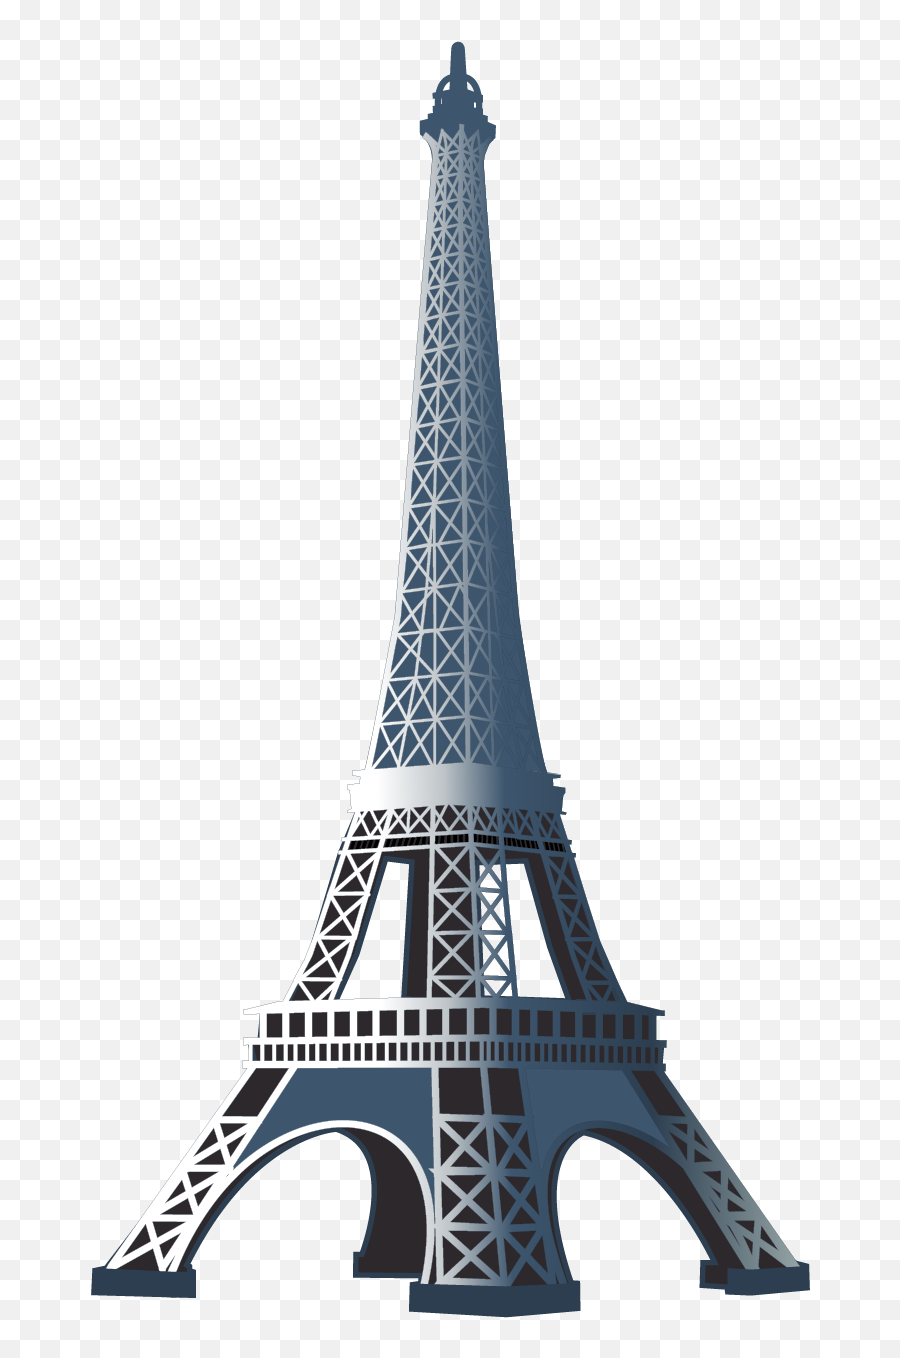 Eiffel Tower Png Images Free Download - Eiffel Tower,Tower Png